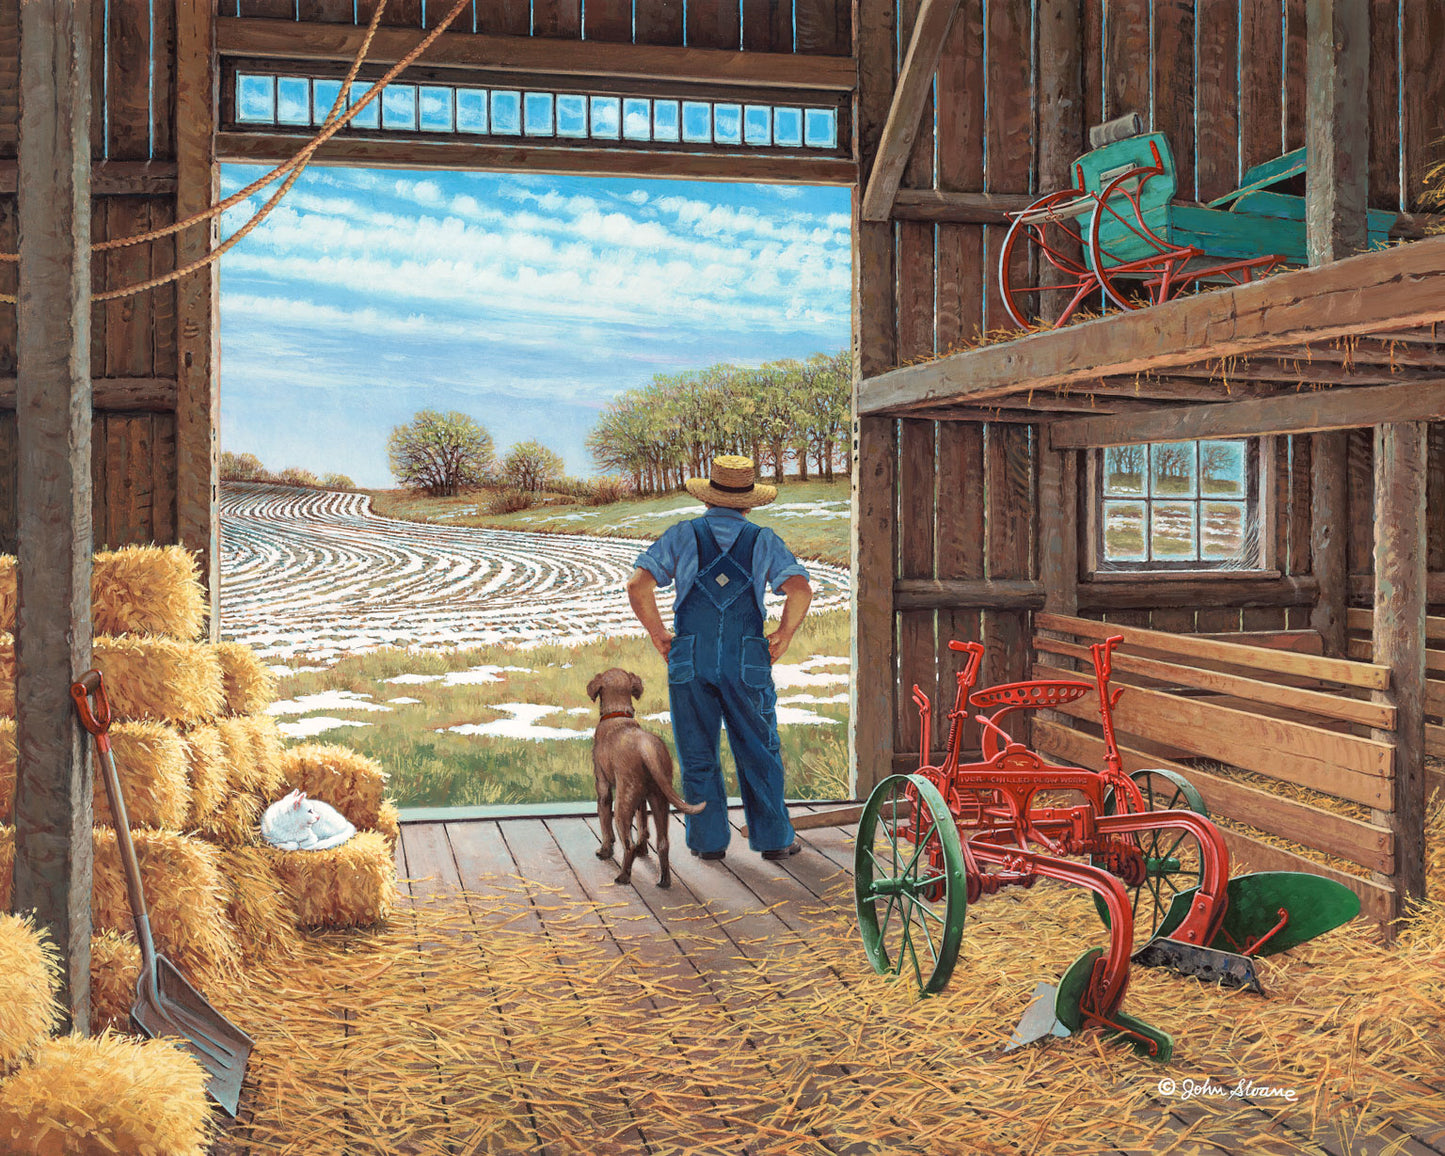 Waiting for Spring - Puzzle by John Sloane